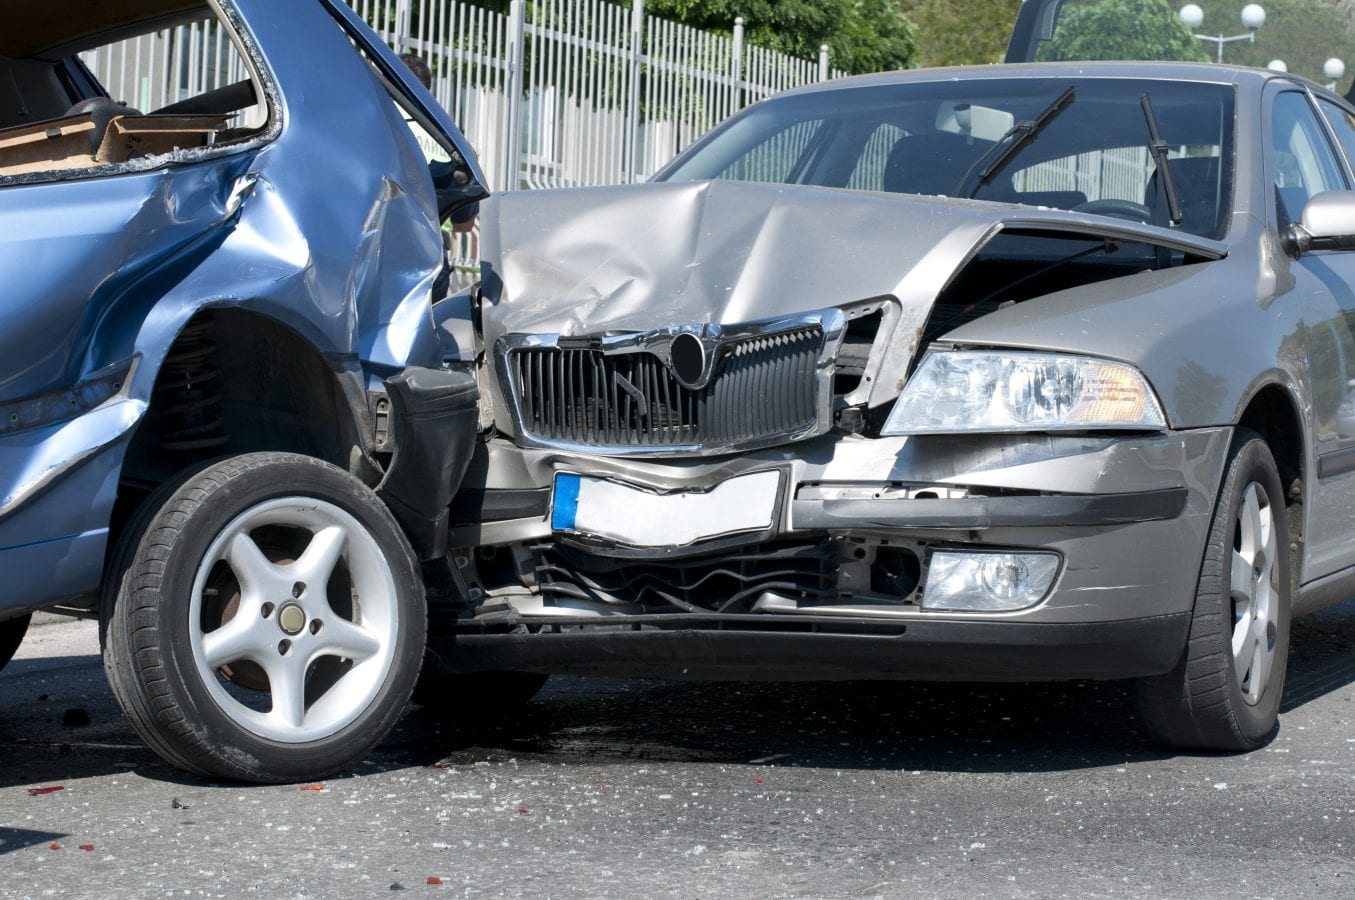 Car Accident Lawyer In Miami Advocates For Justice In Motor Vehicle